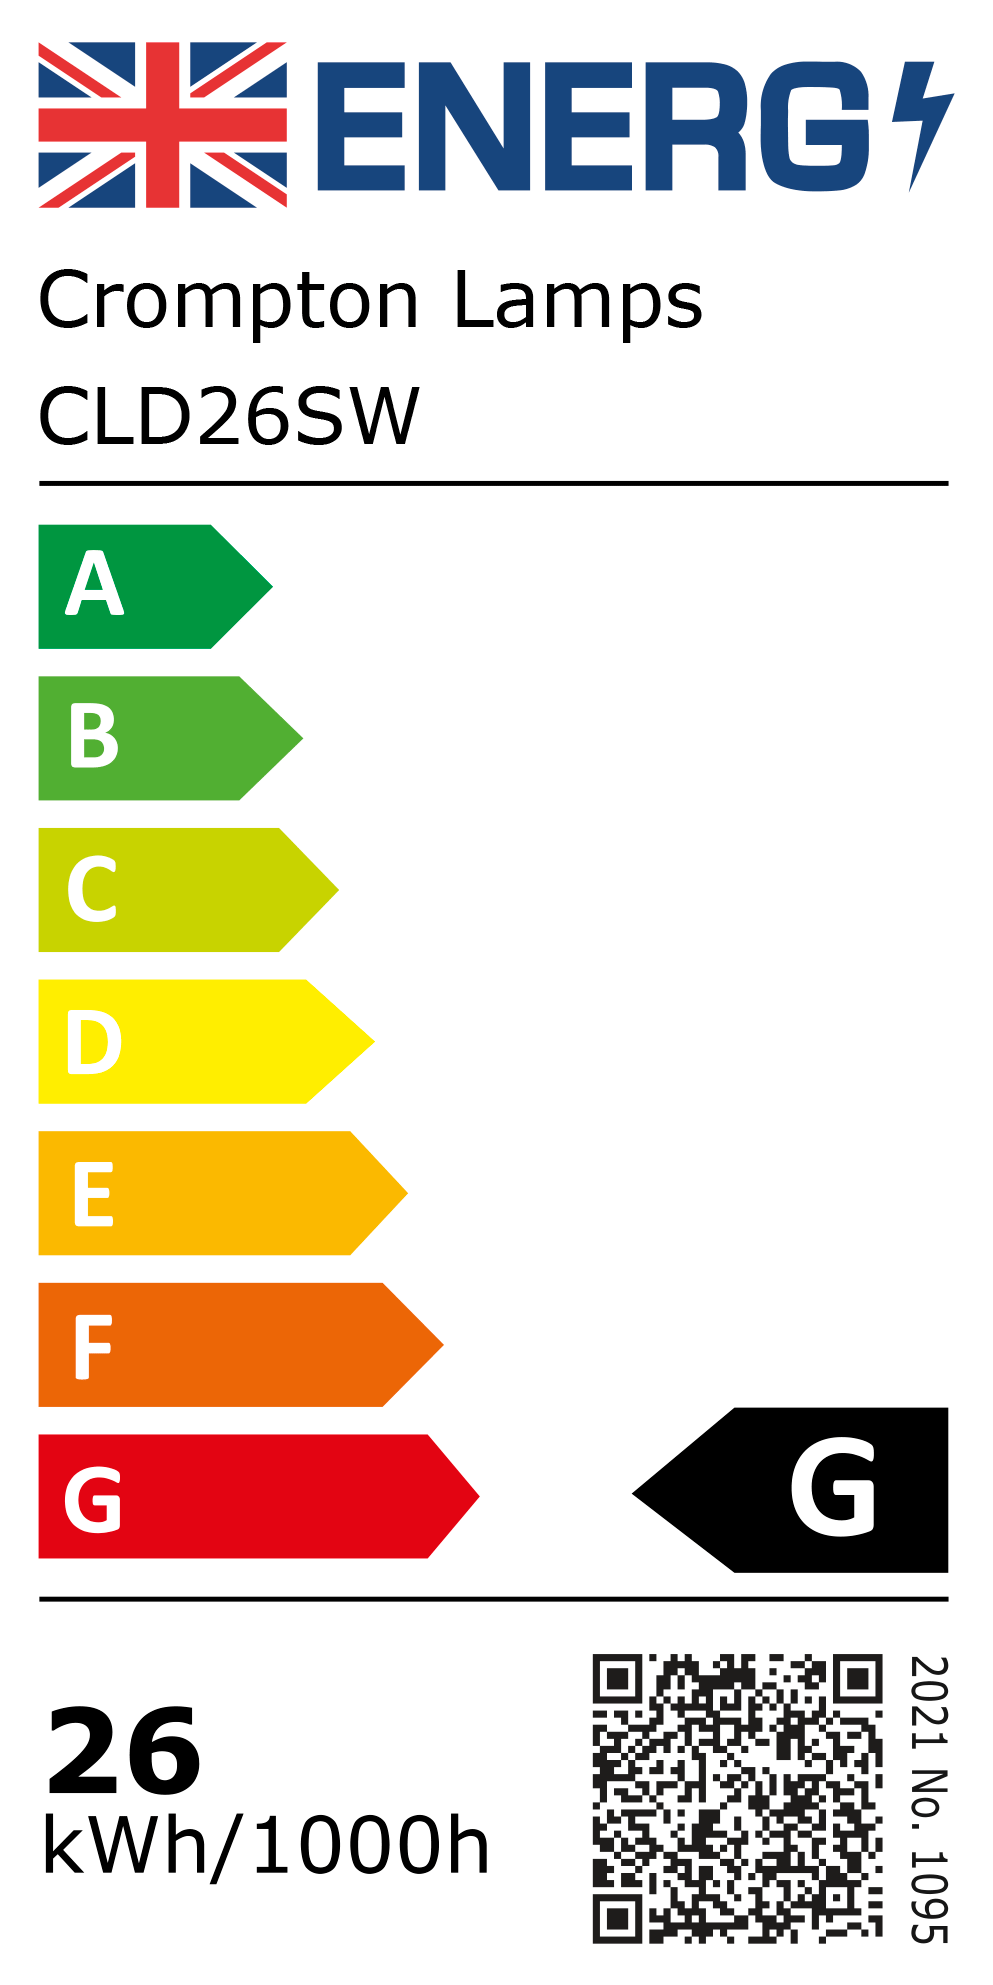 New 2021 Energy Rating Label: Stock Code CLD26SW